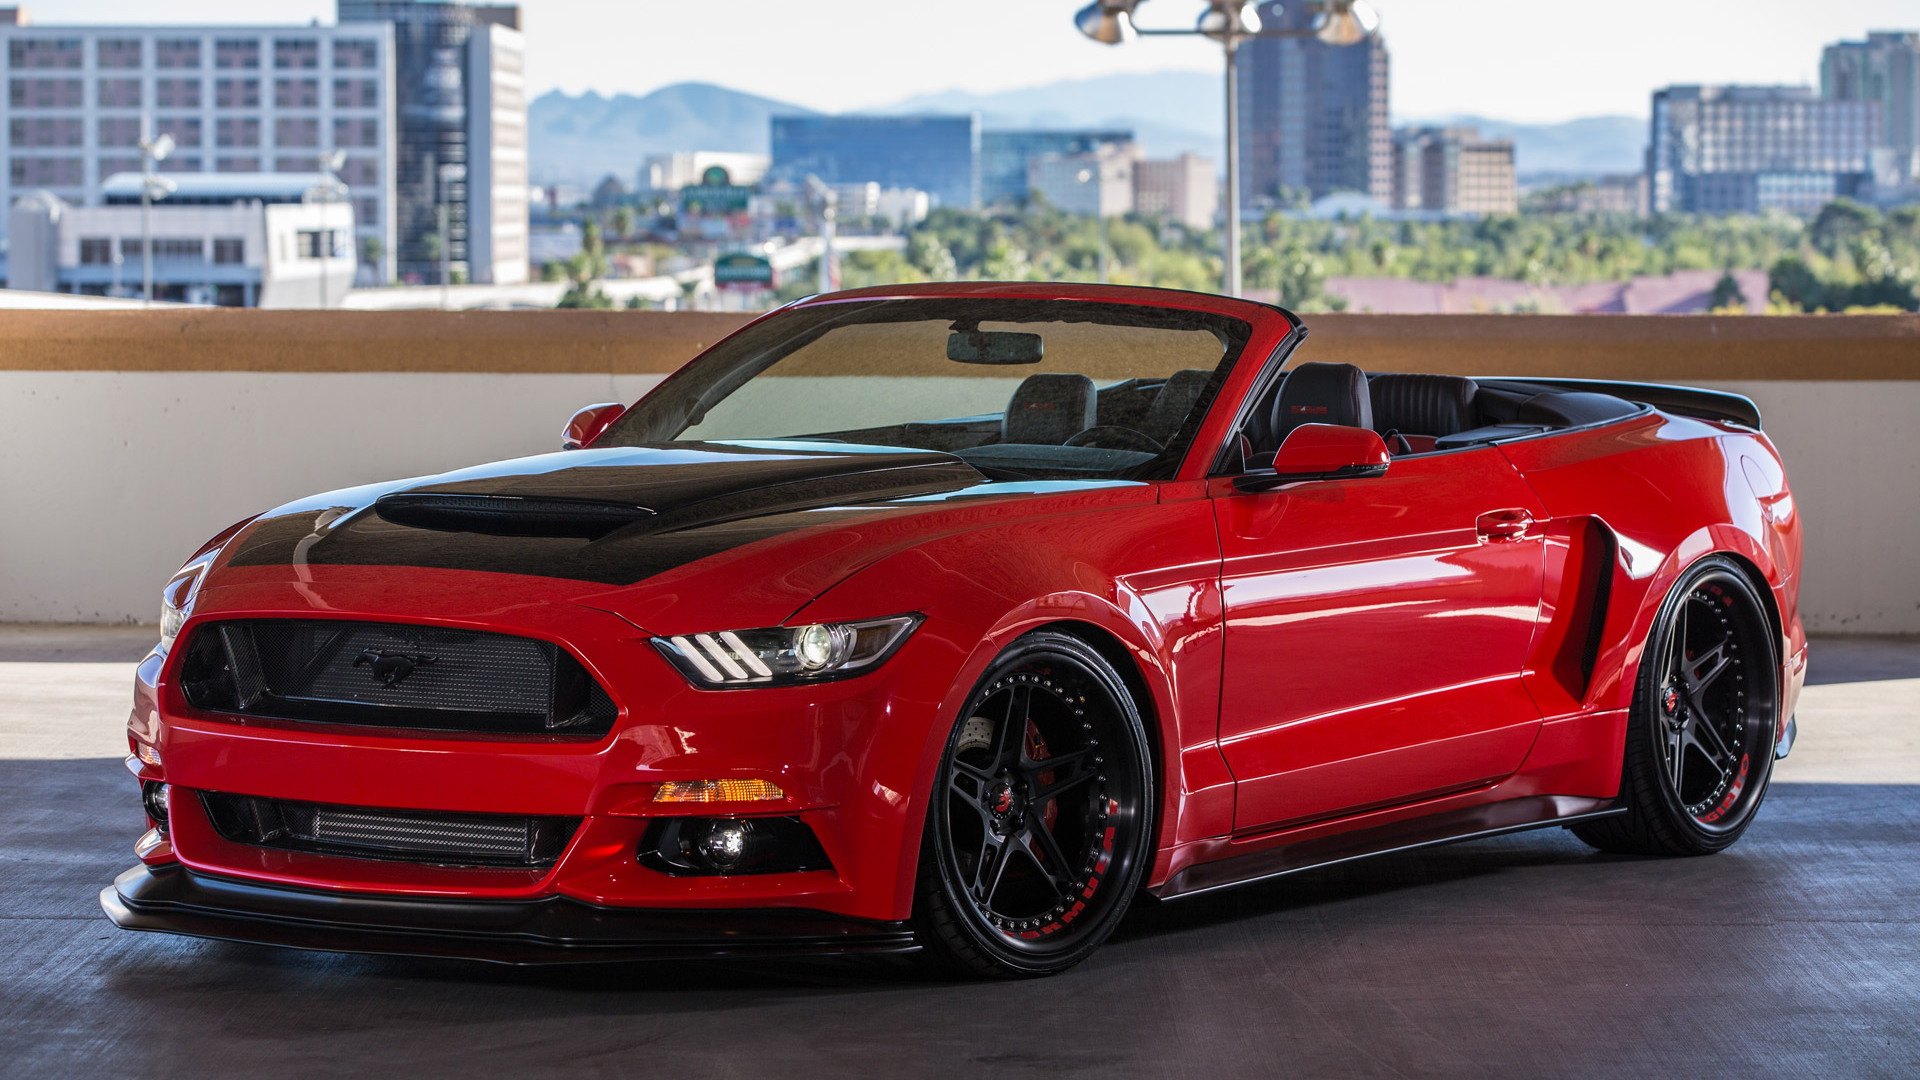 2016 Ford Mustang by TS Designs, 2015 SEMA show